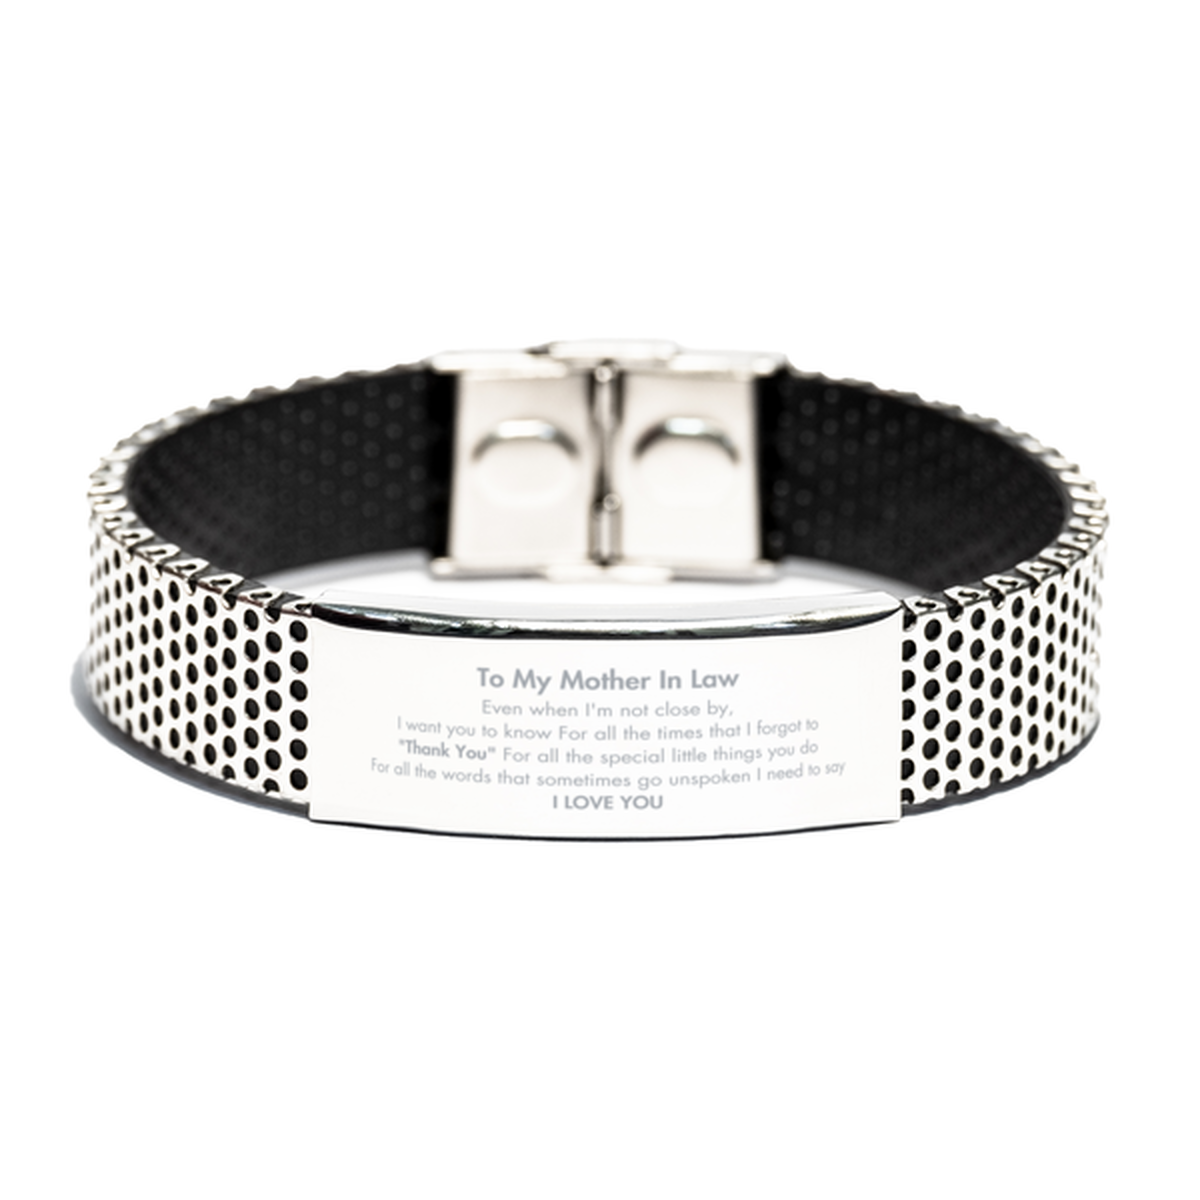 Thank You Gifts for Mother In Law, Keepsake Stainless Steel Bracelet Gifts for Mother In Law Birthday Mother's day Father's Day Mother In Law For all the words That sometimes go unspoken I need to say I LOVE YOU